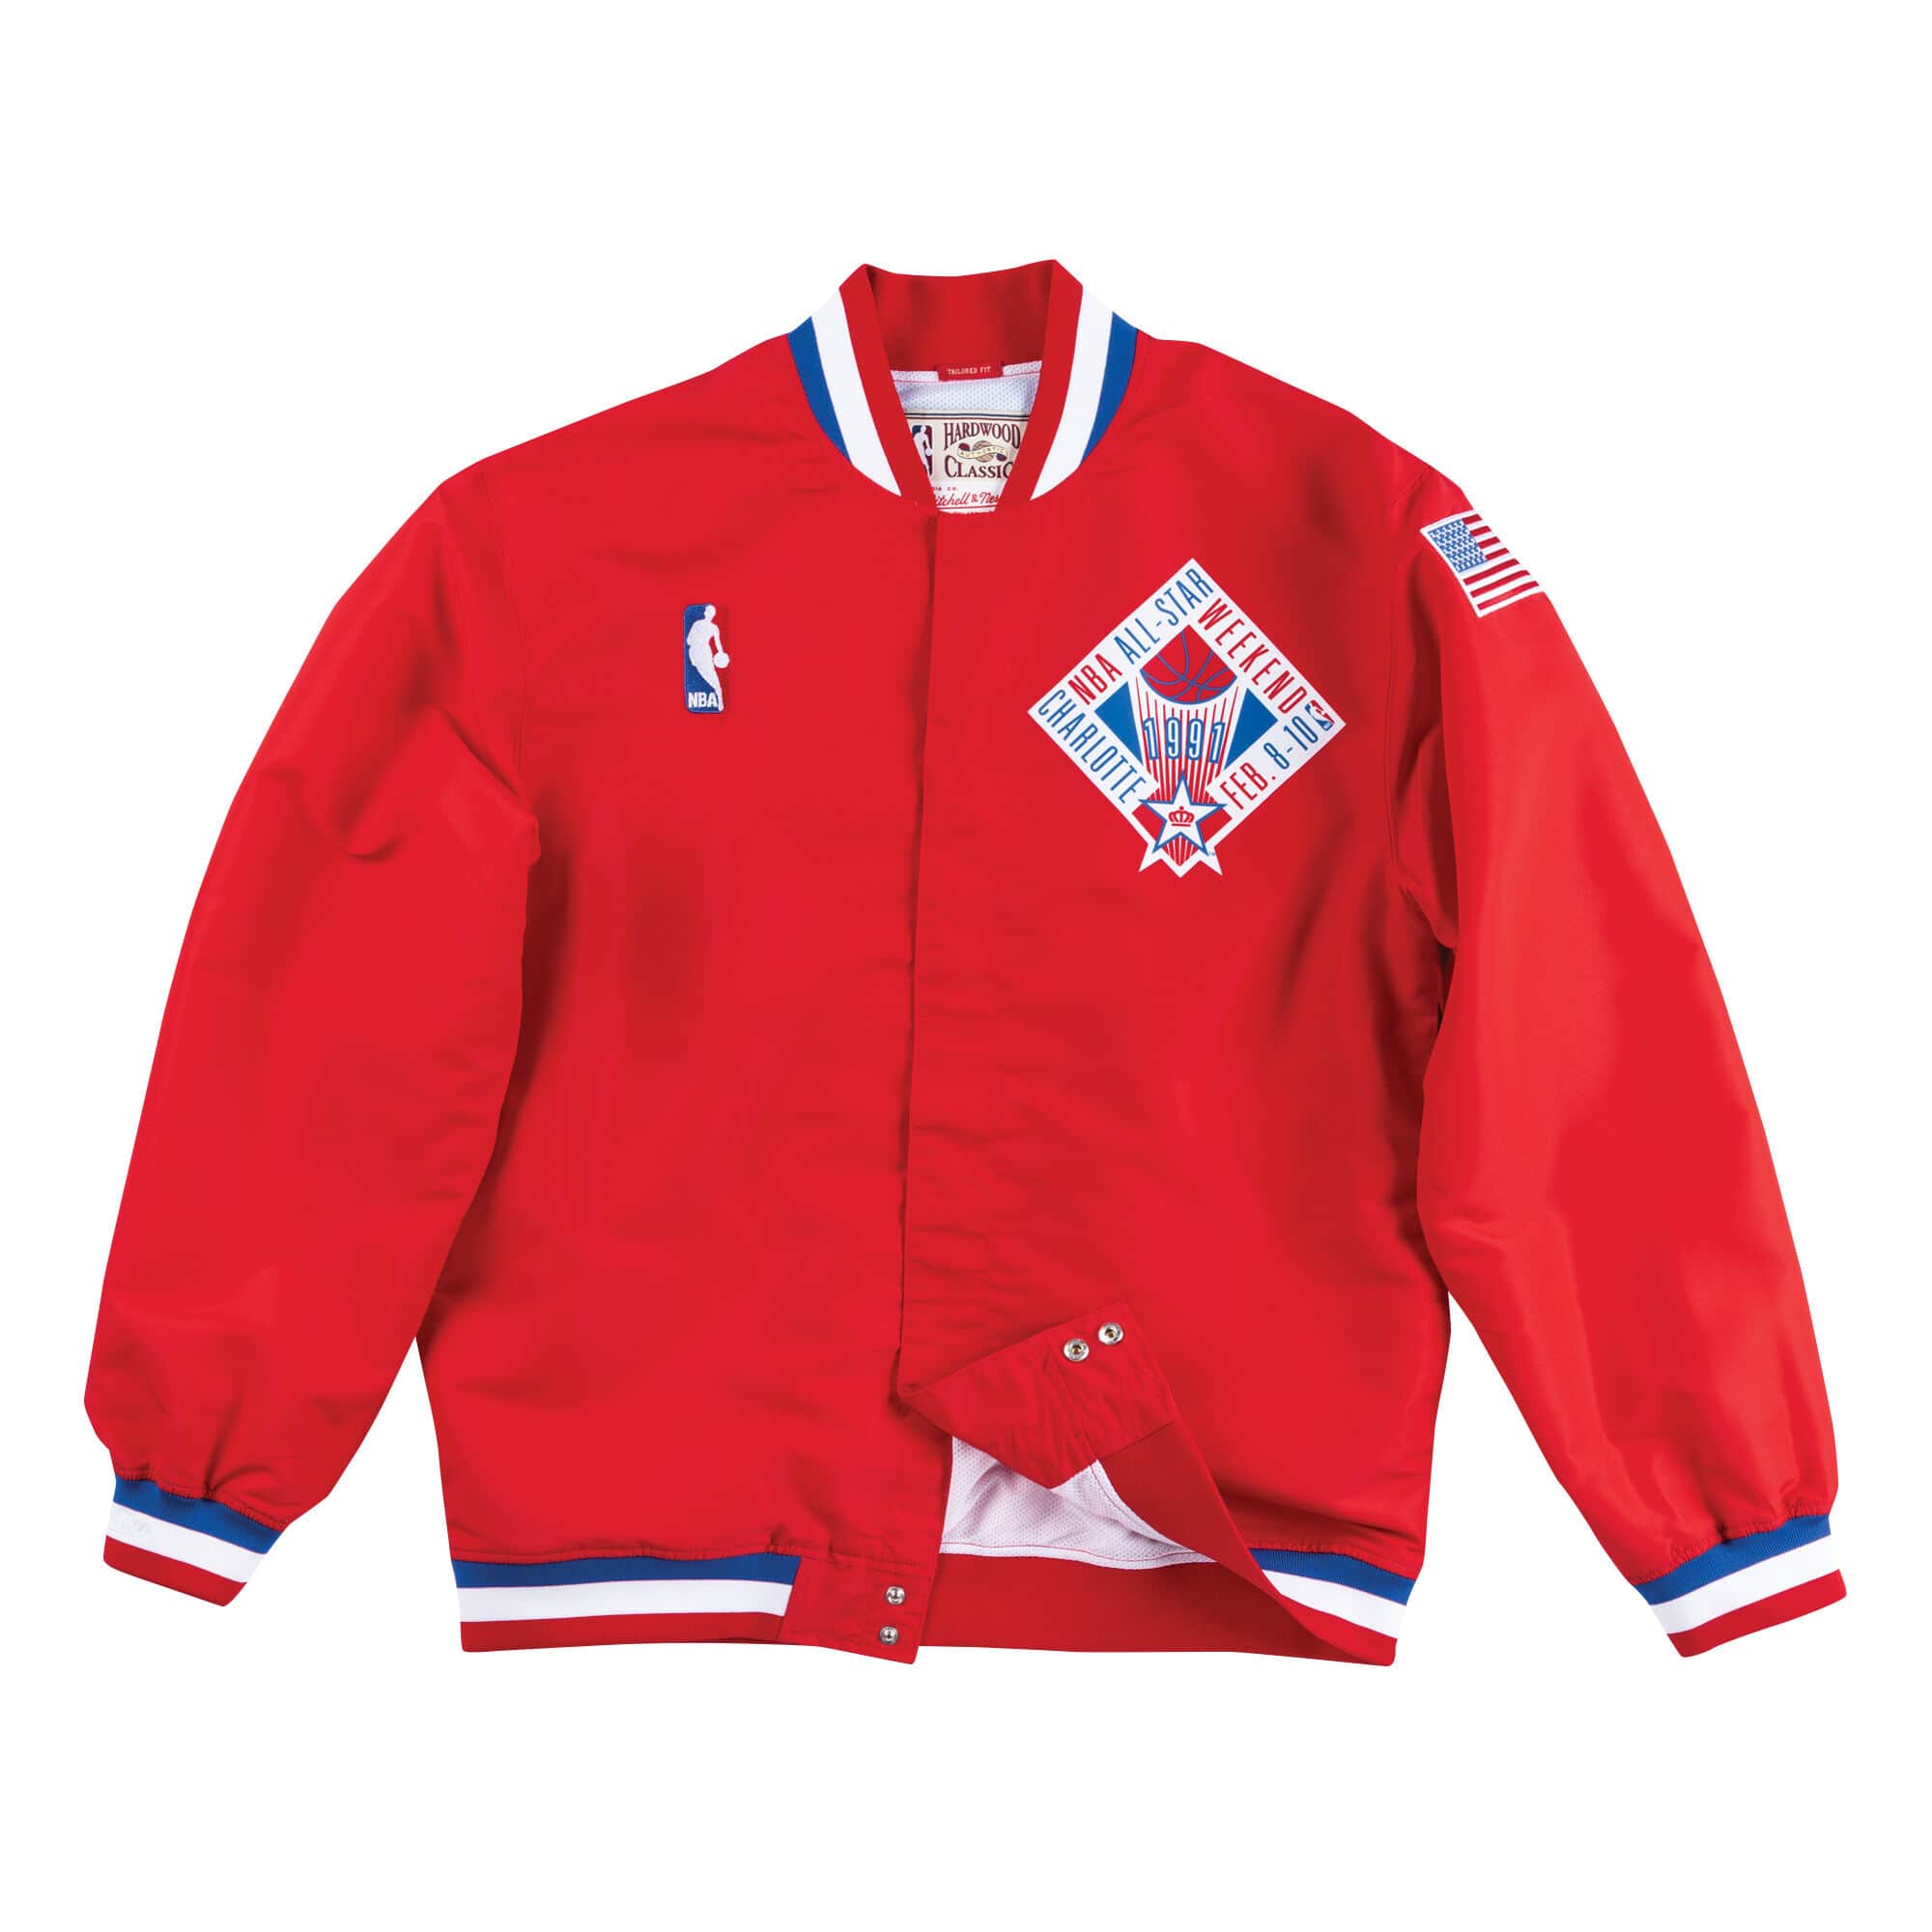 Authentic Warm Up Jacket All-Star West 1991 – Mitchell and Ness 